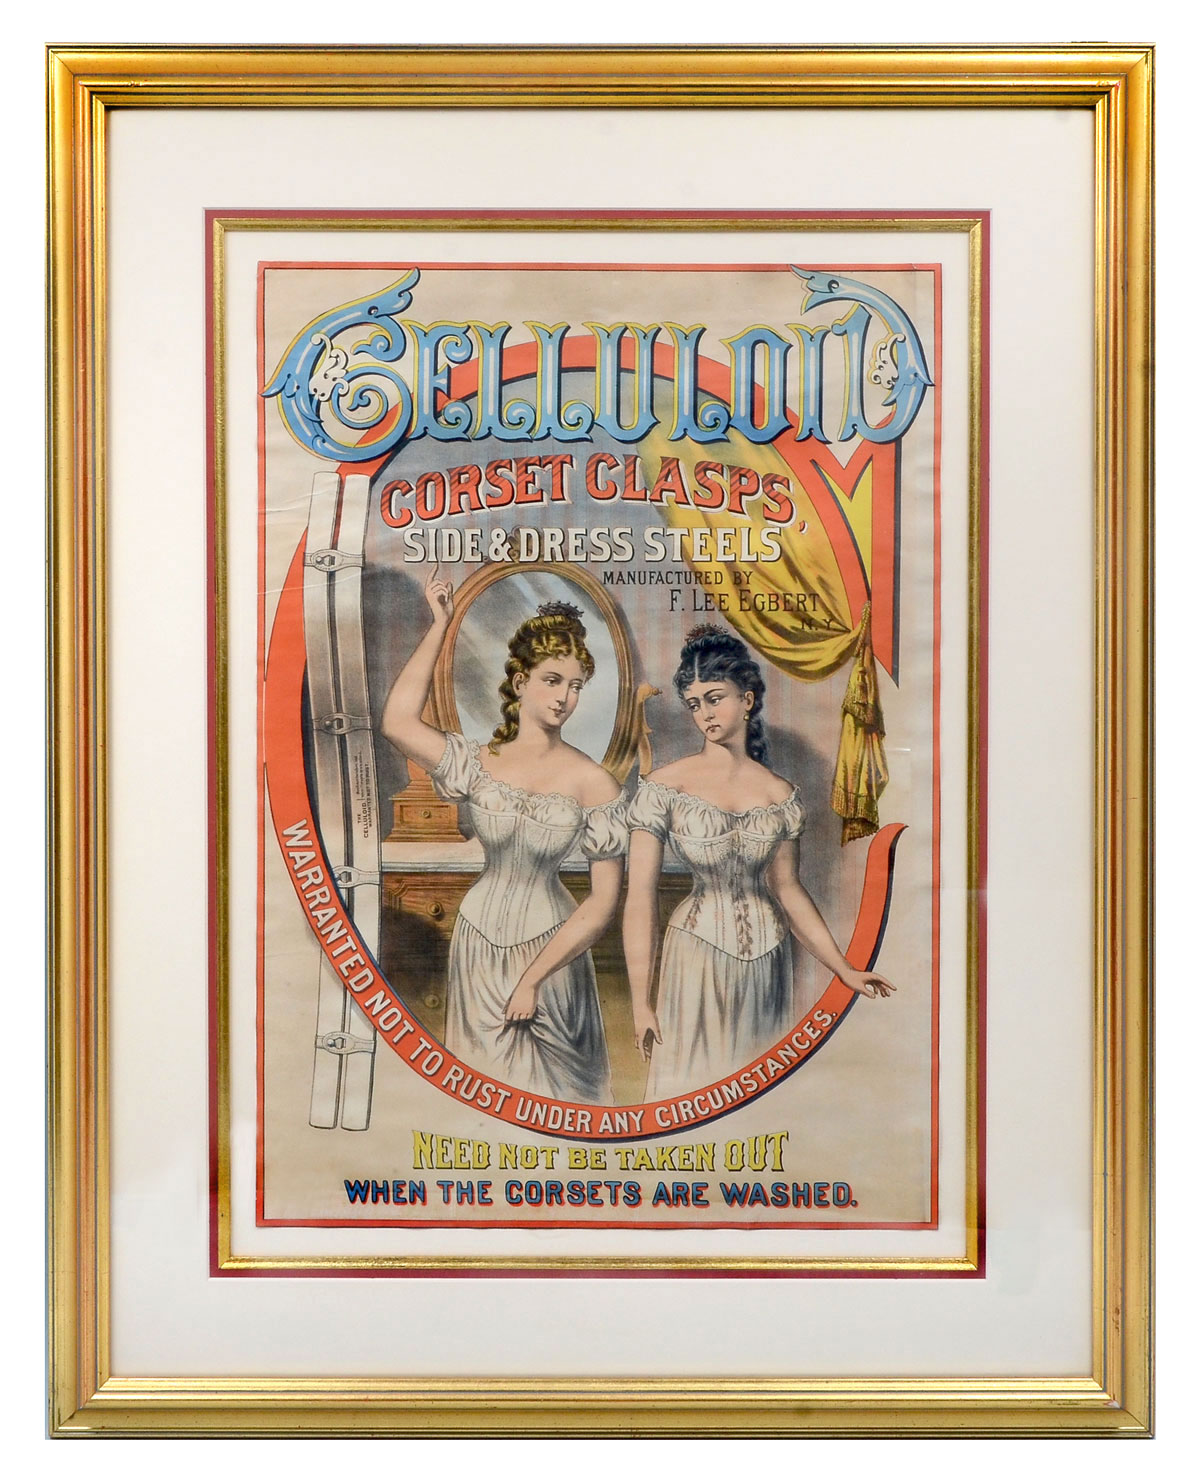 ADVERTISEMENT LITHOGRAPH FOR CELLULOID